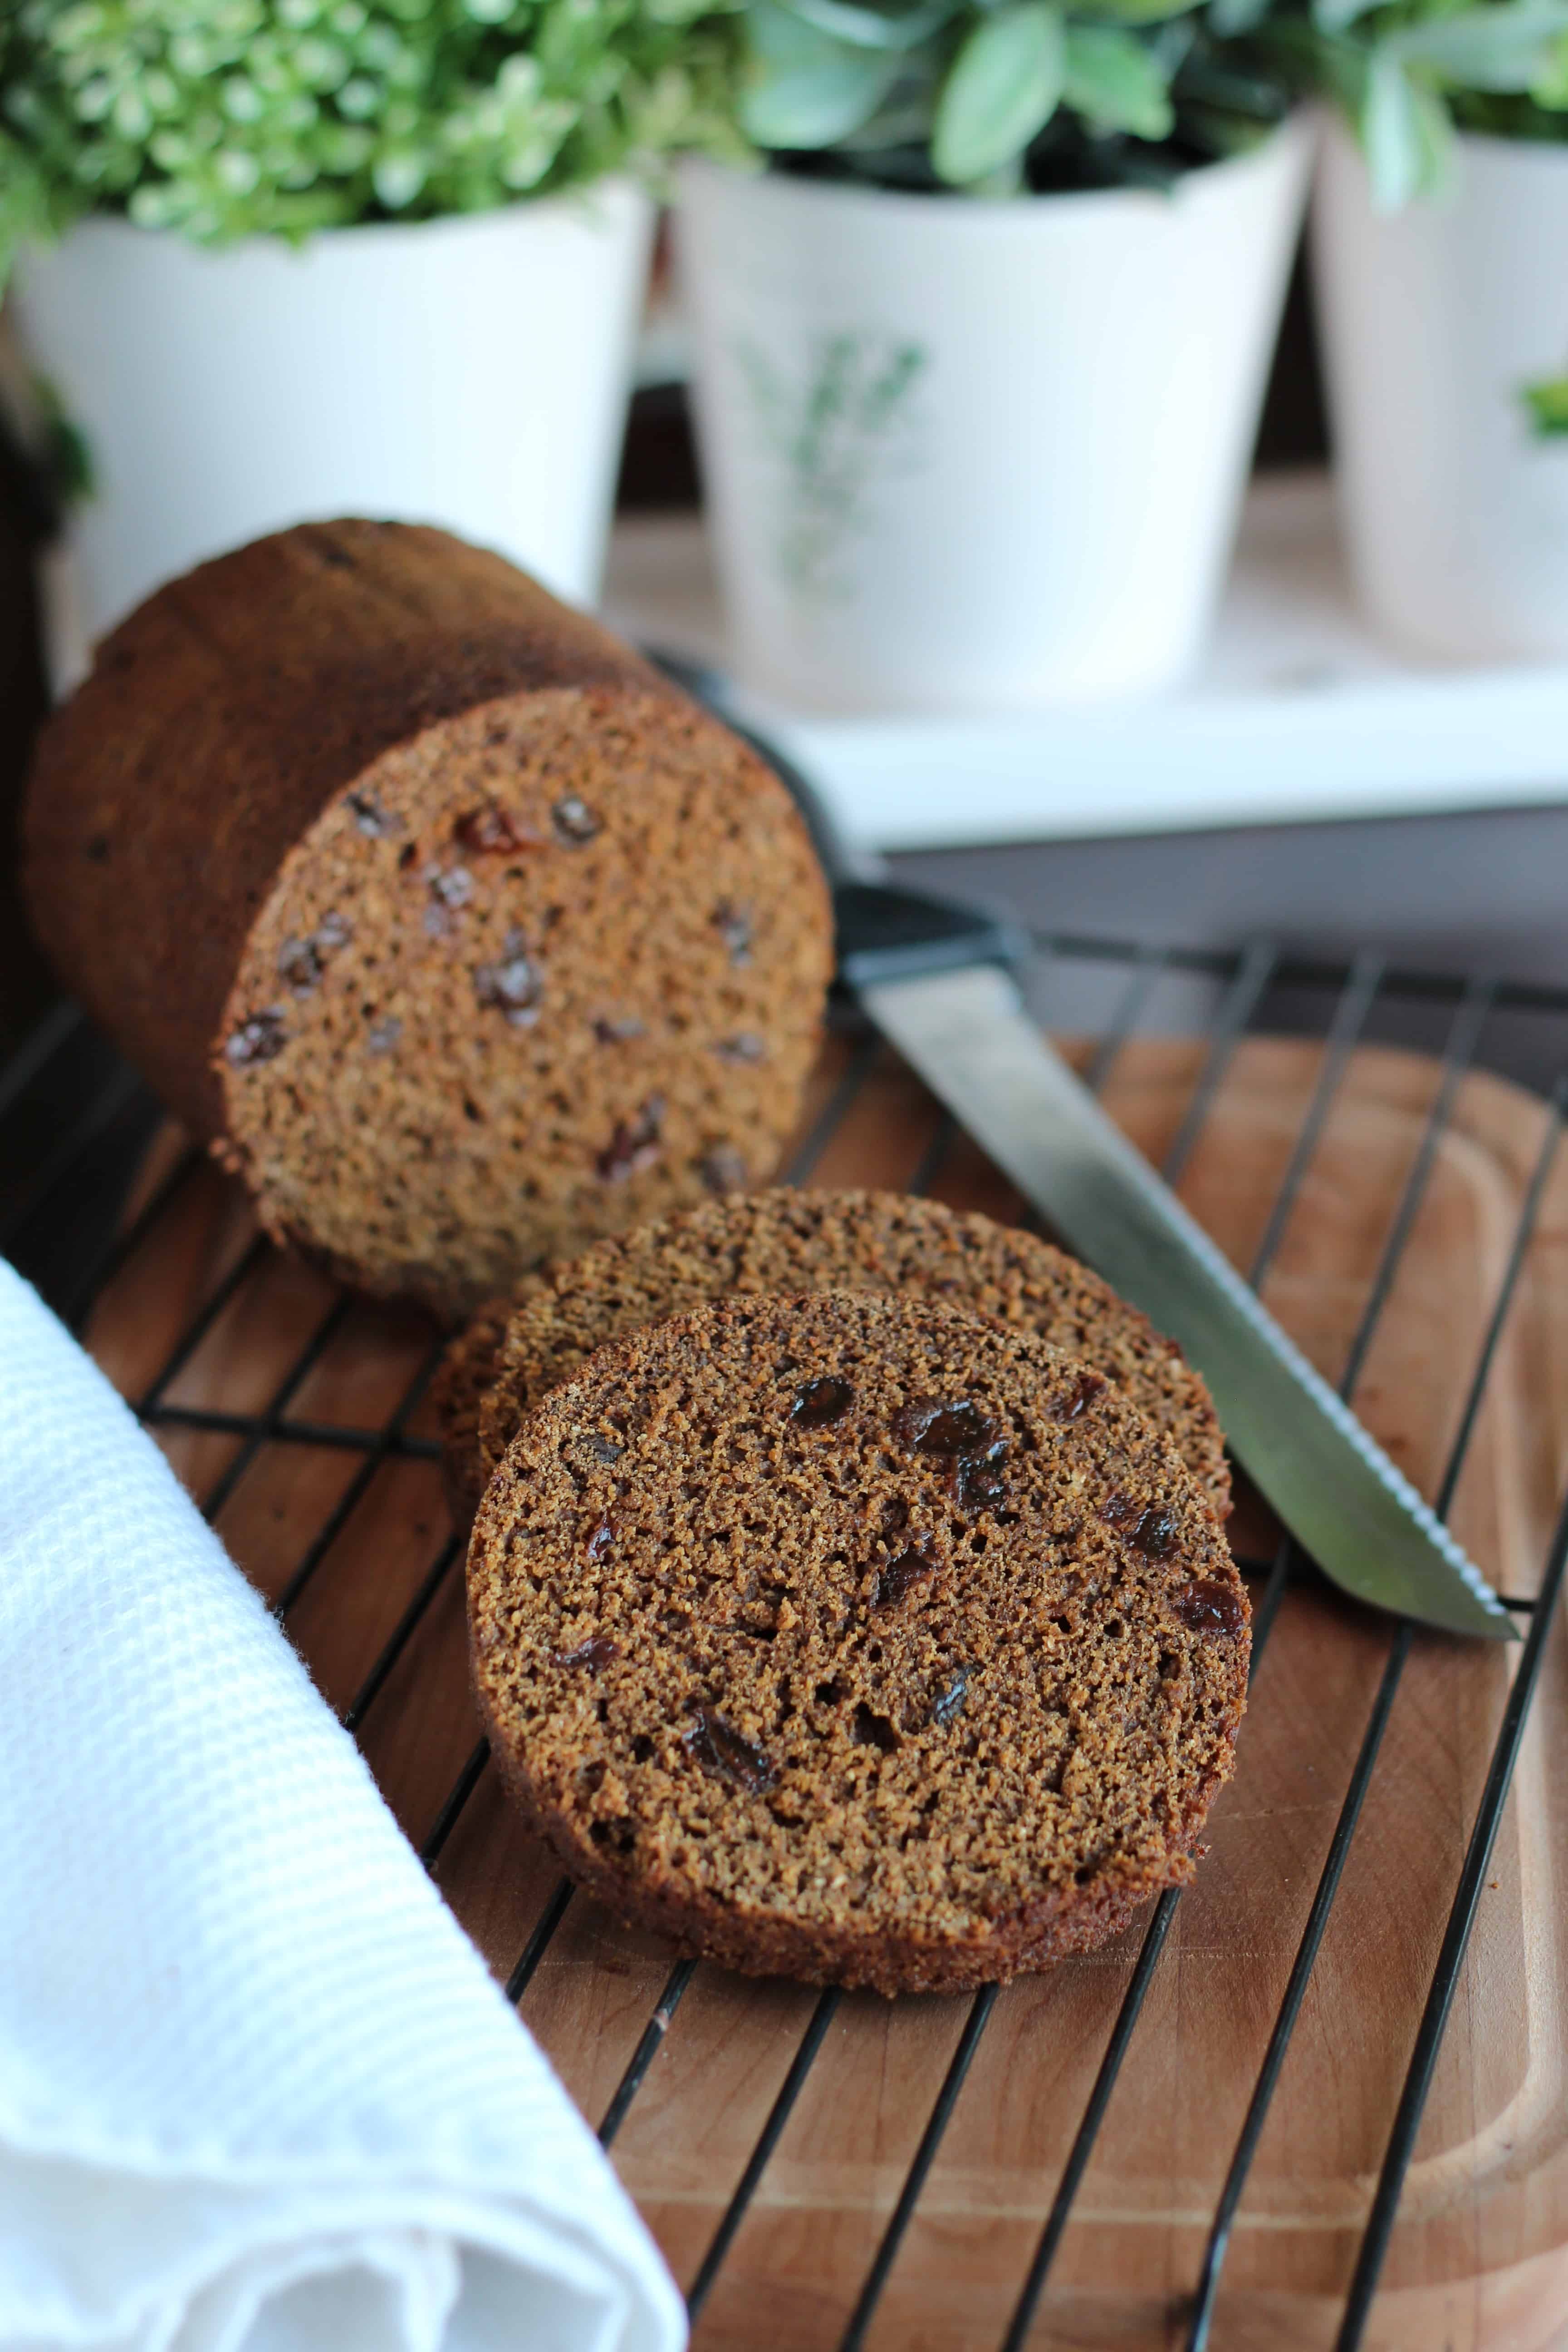 Boston brown bread baked in a can